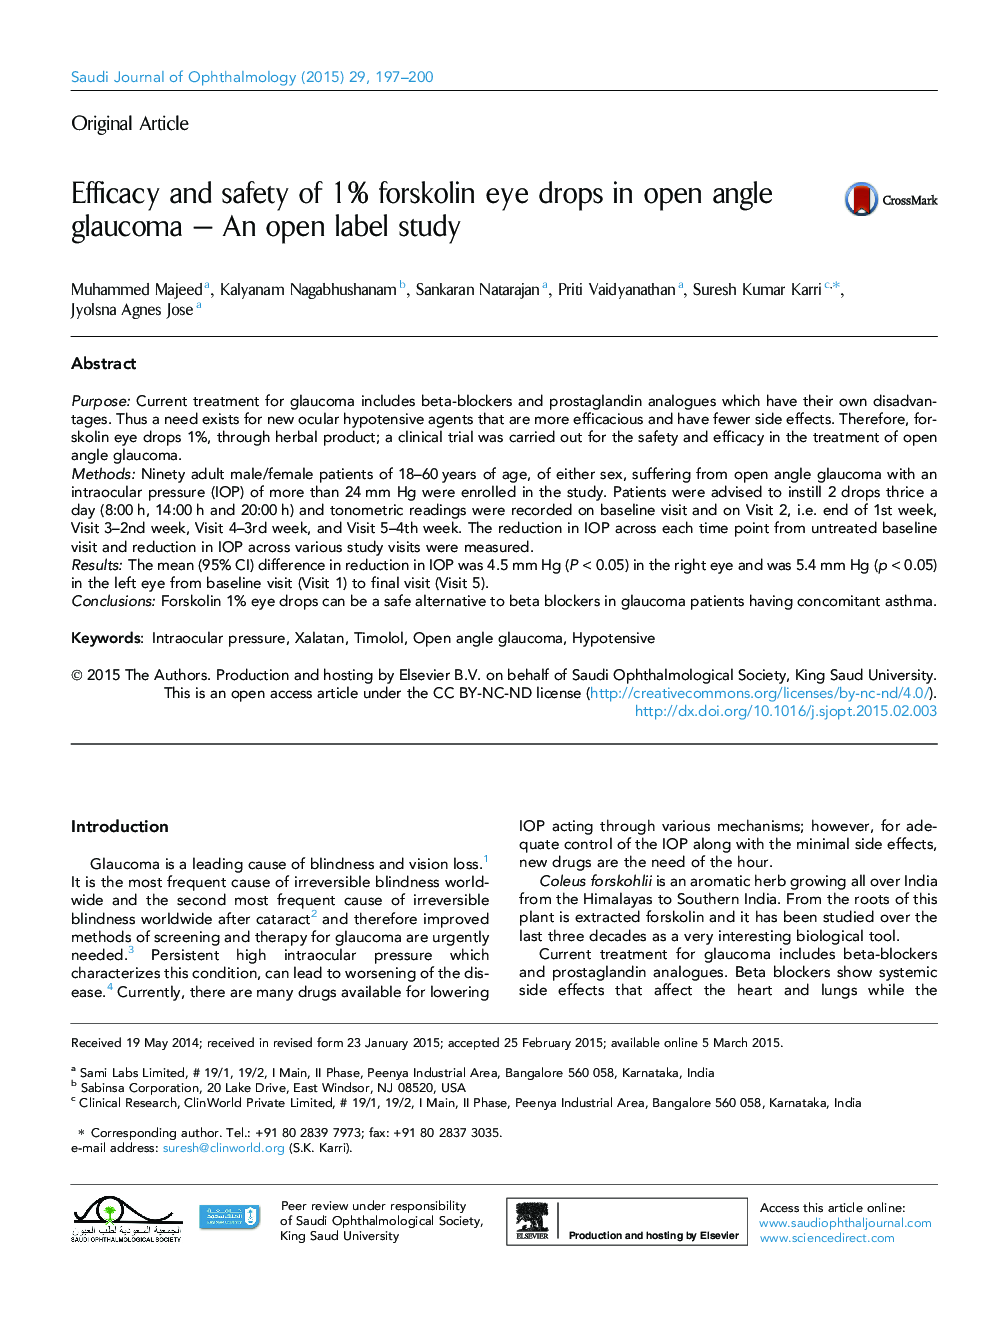 Efficacy and safety of 1% forskolin eye drops in open angle glaucoma – An open label study 